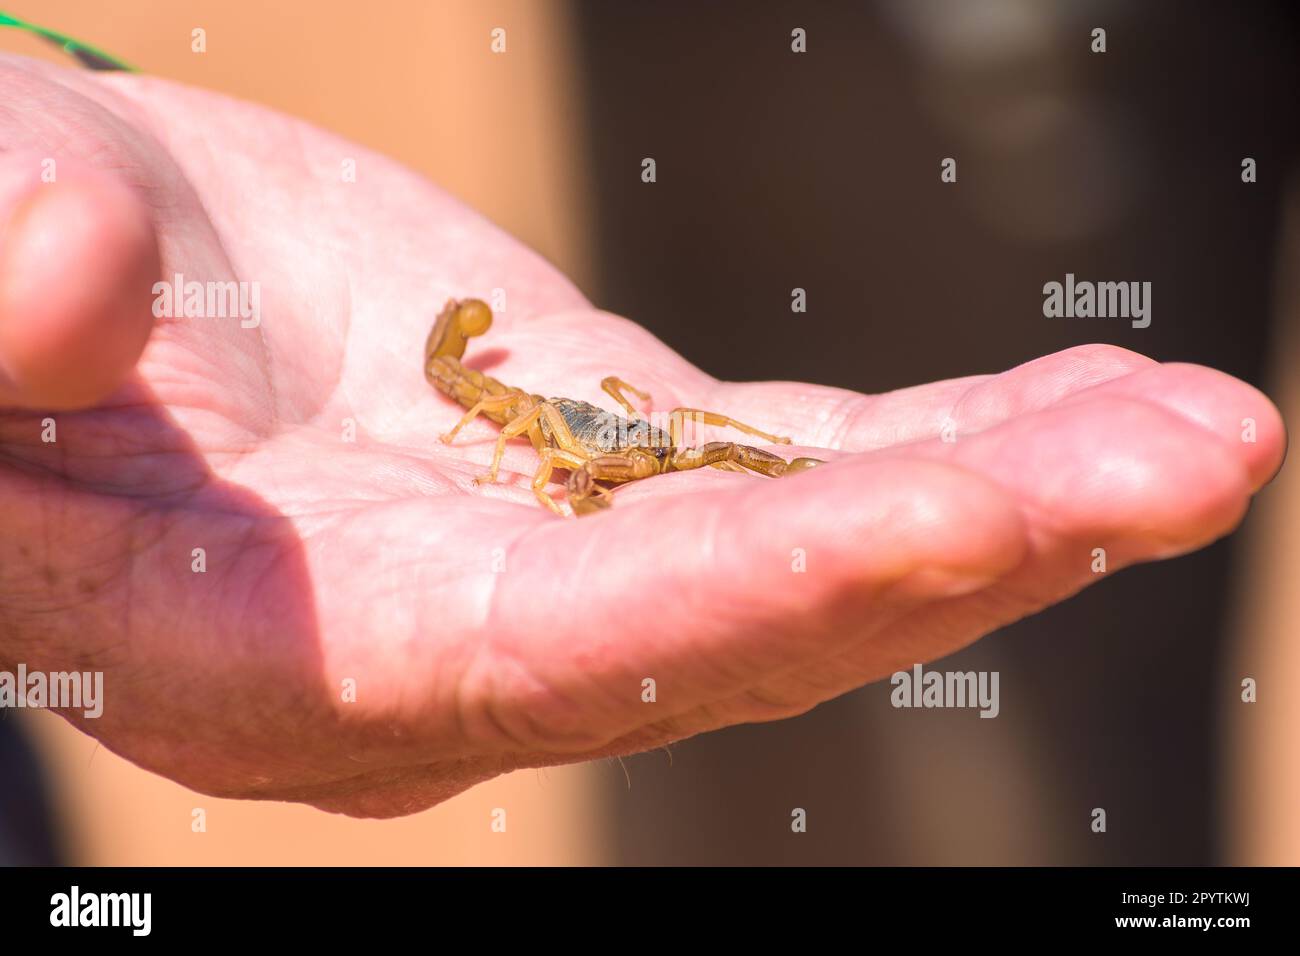 Holding Scorpion in close-up, Moroccan Scorpion on hand (Buthus mardochei) Stock Photo